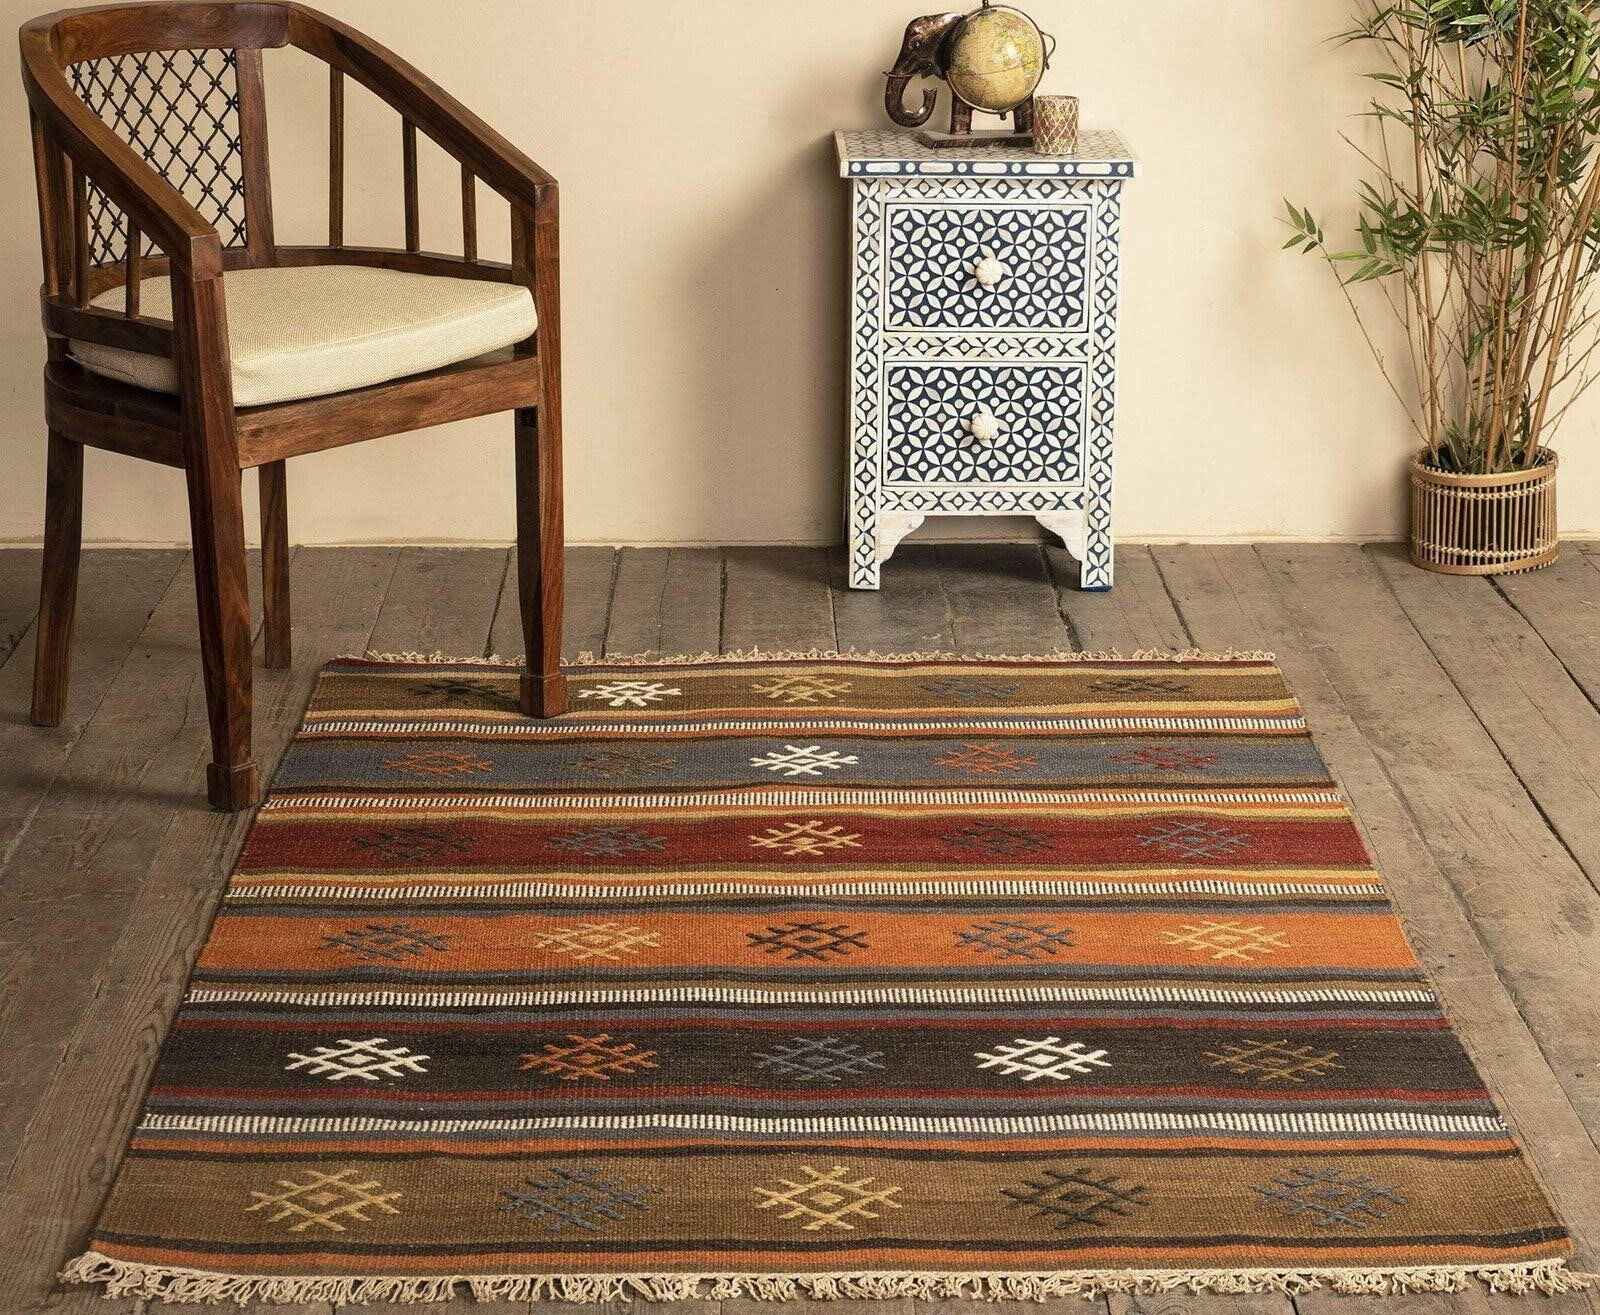 Alfombras Non-Skid 5x7 Rubber Backing Moroccan Geometric Low Profile Pile  Rug